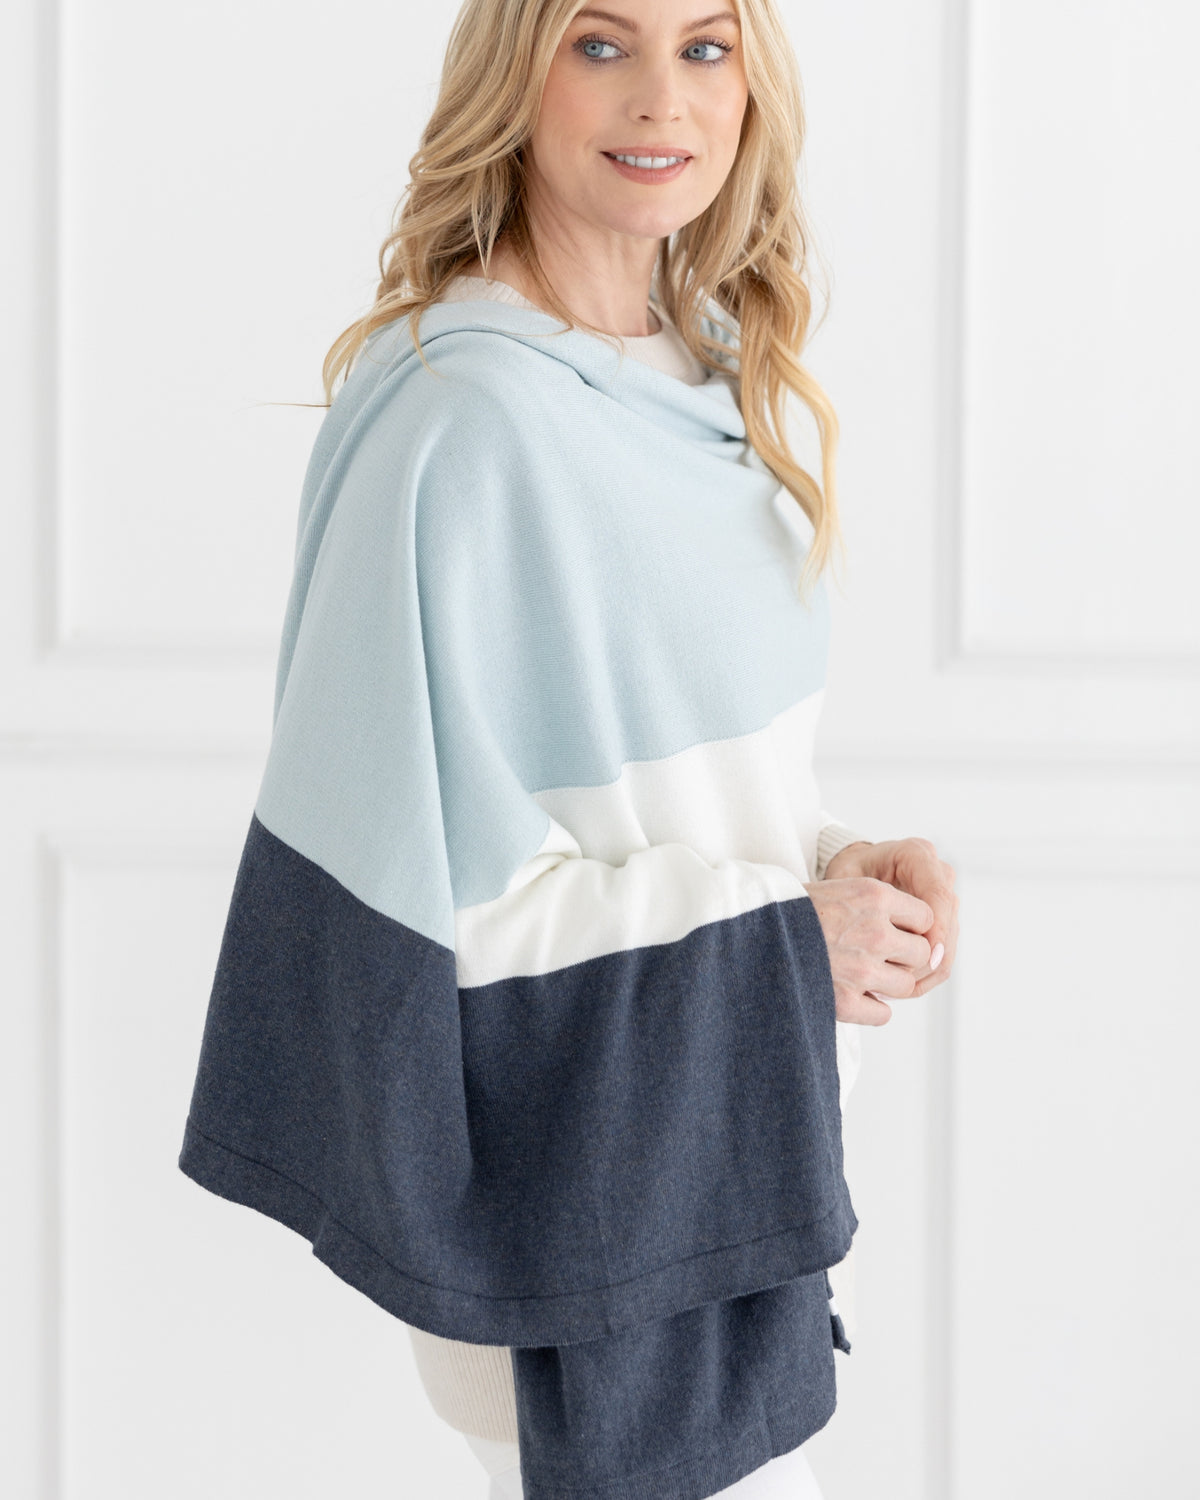 Woman wearing the Dreamsoft Travel Scarf in Sky Blue Colorblock which is a light blue, gray and cream scarf, worn as a wrap